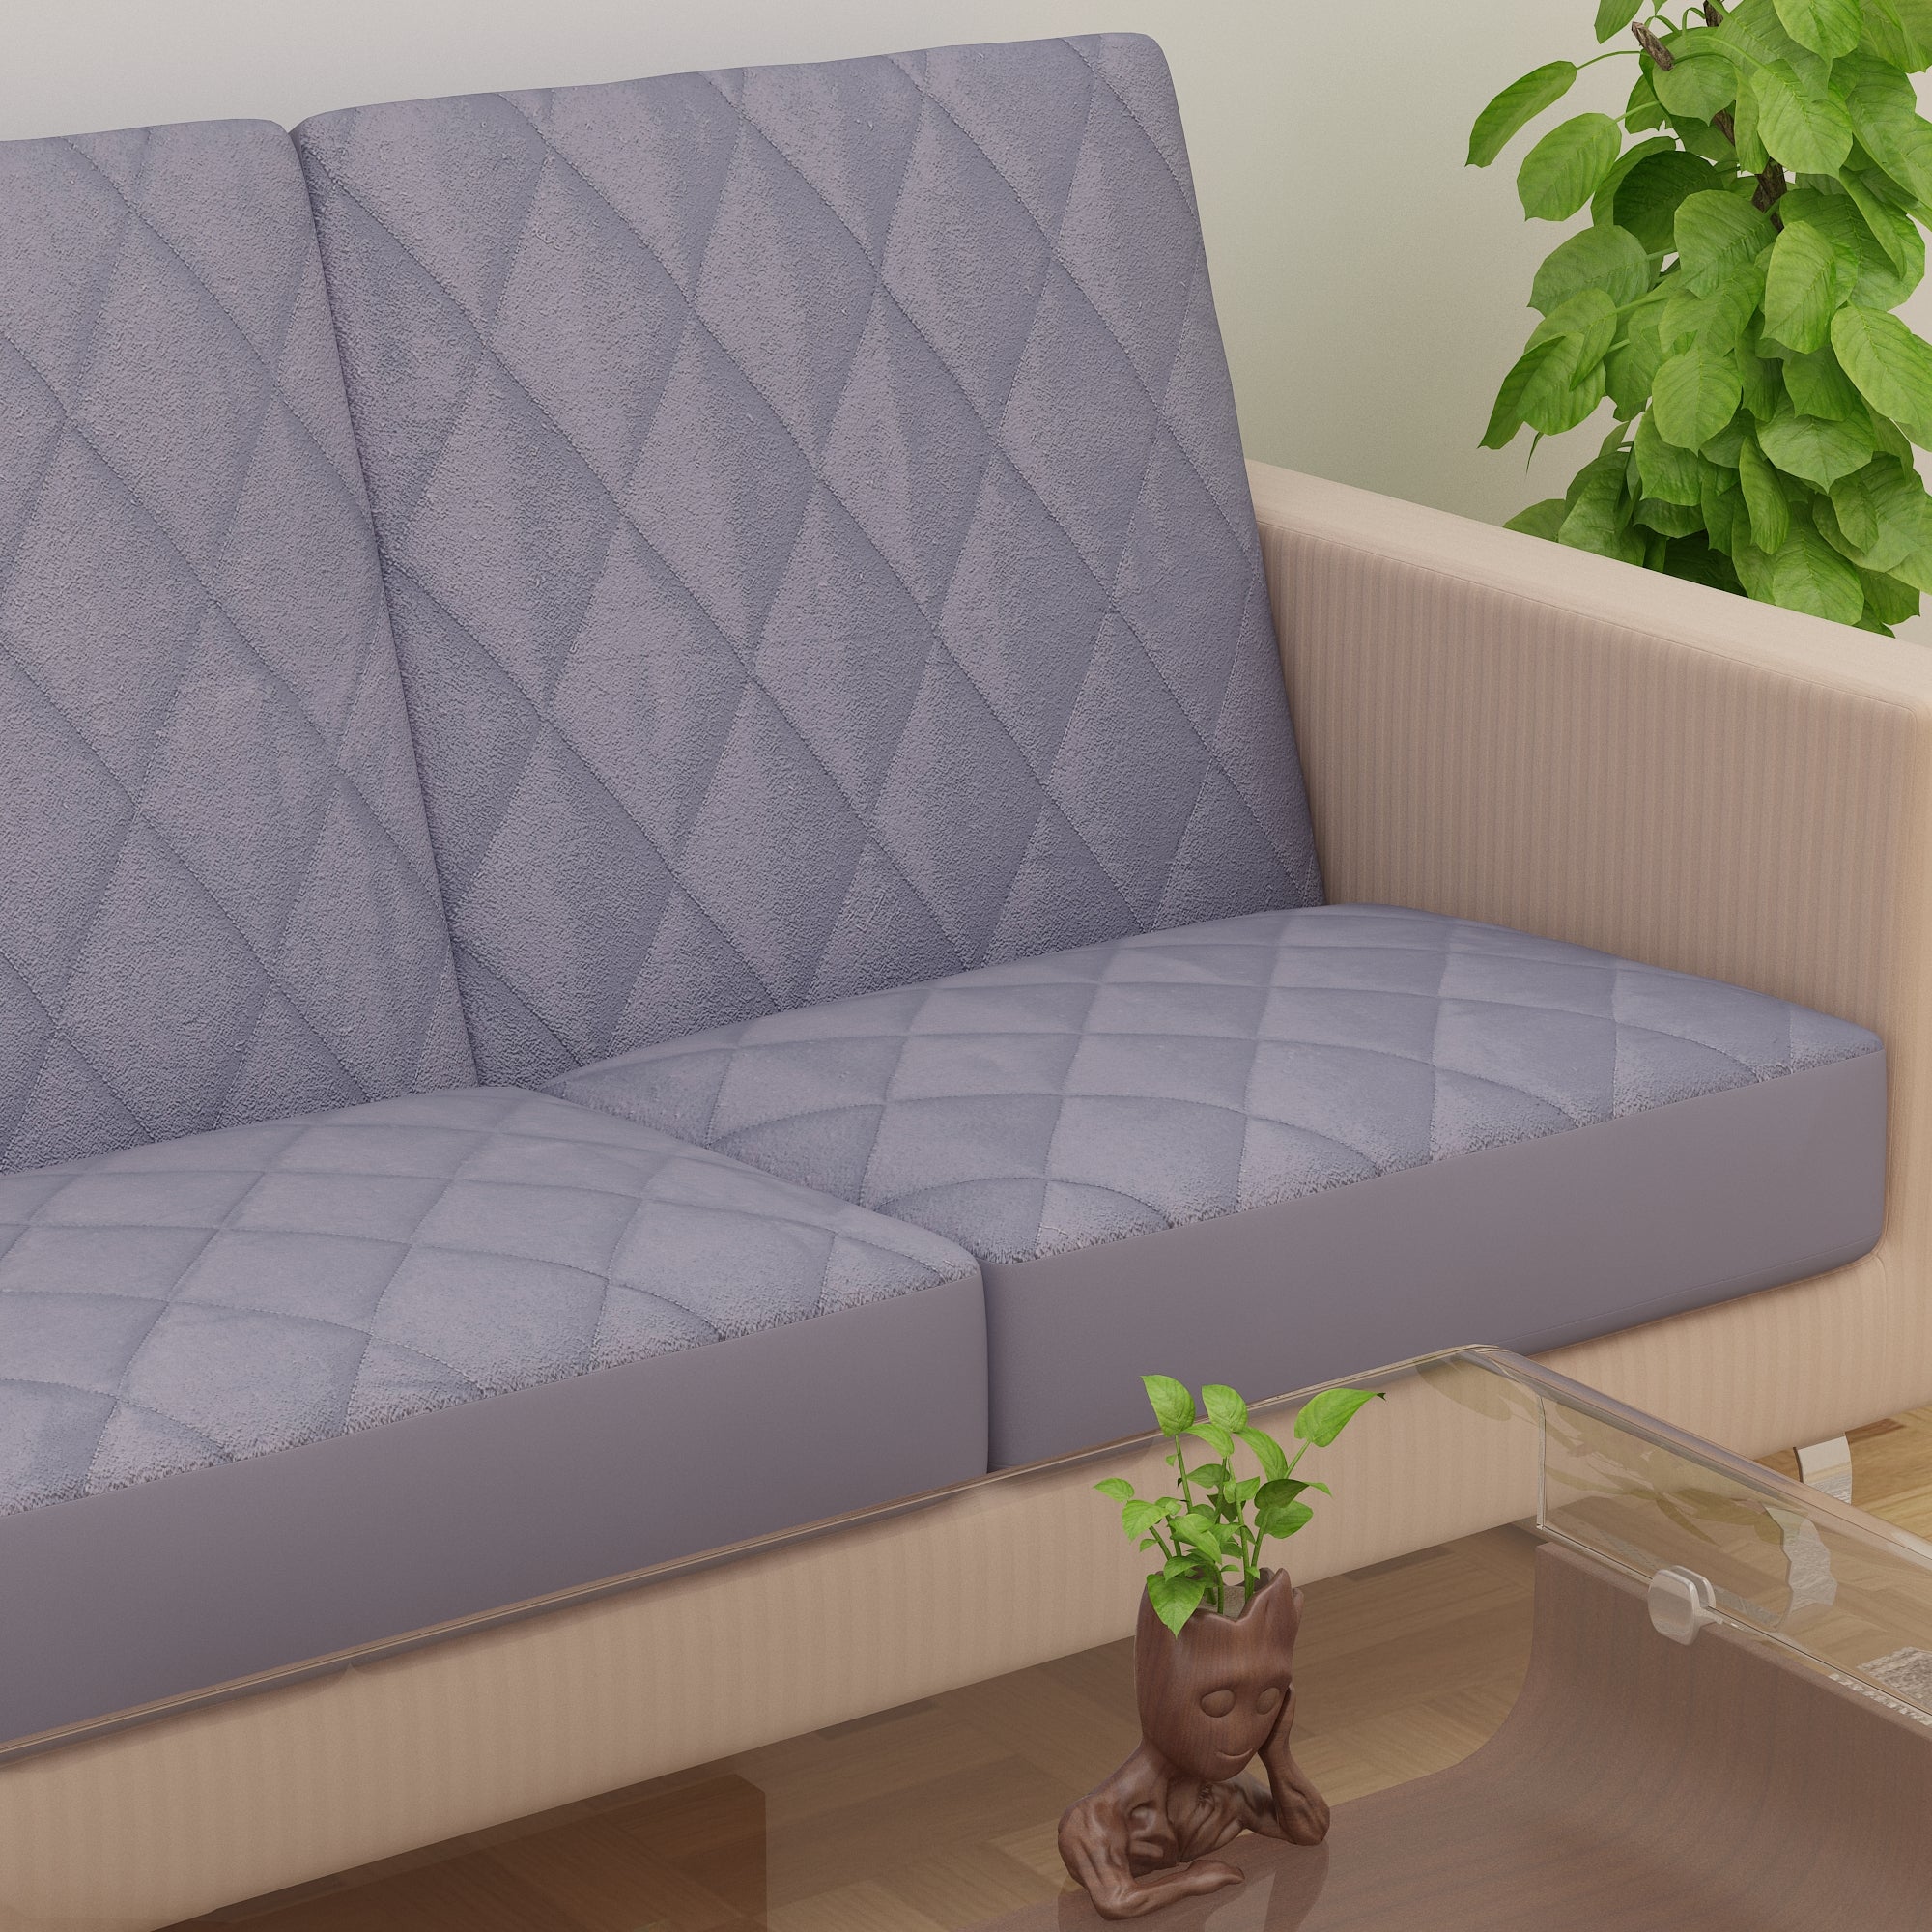 Sapphire Quilted Waterproof Sofa Seat Protector Cover with Stretchable Elastic, Grey